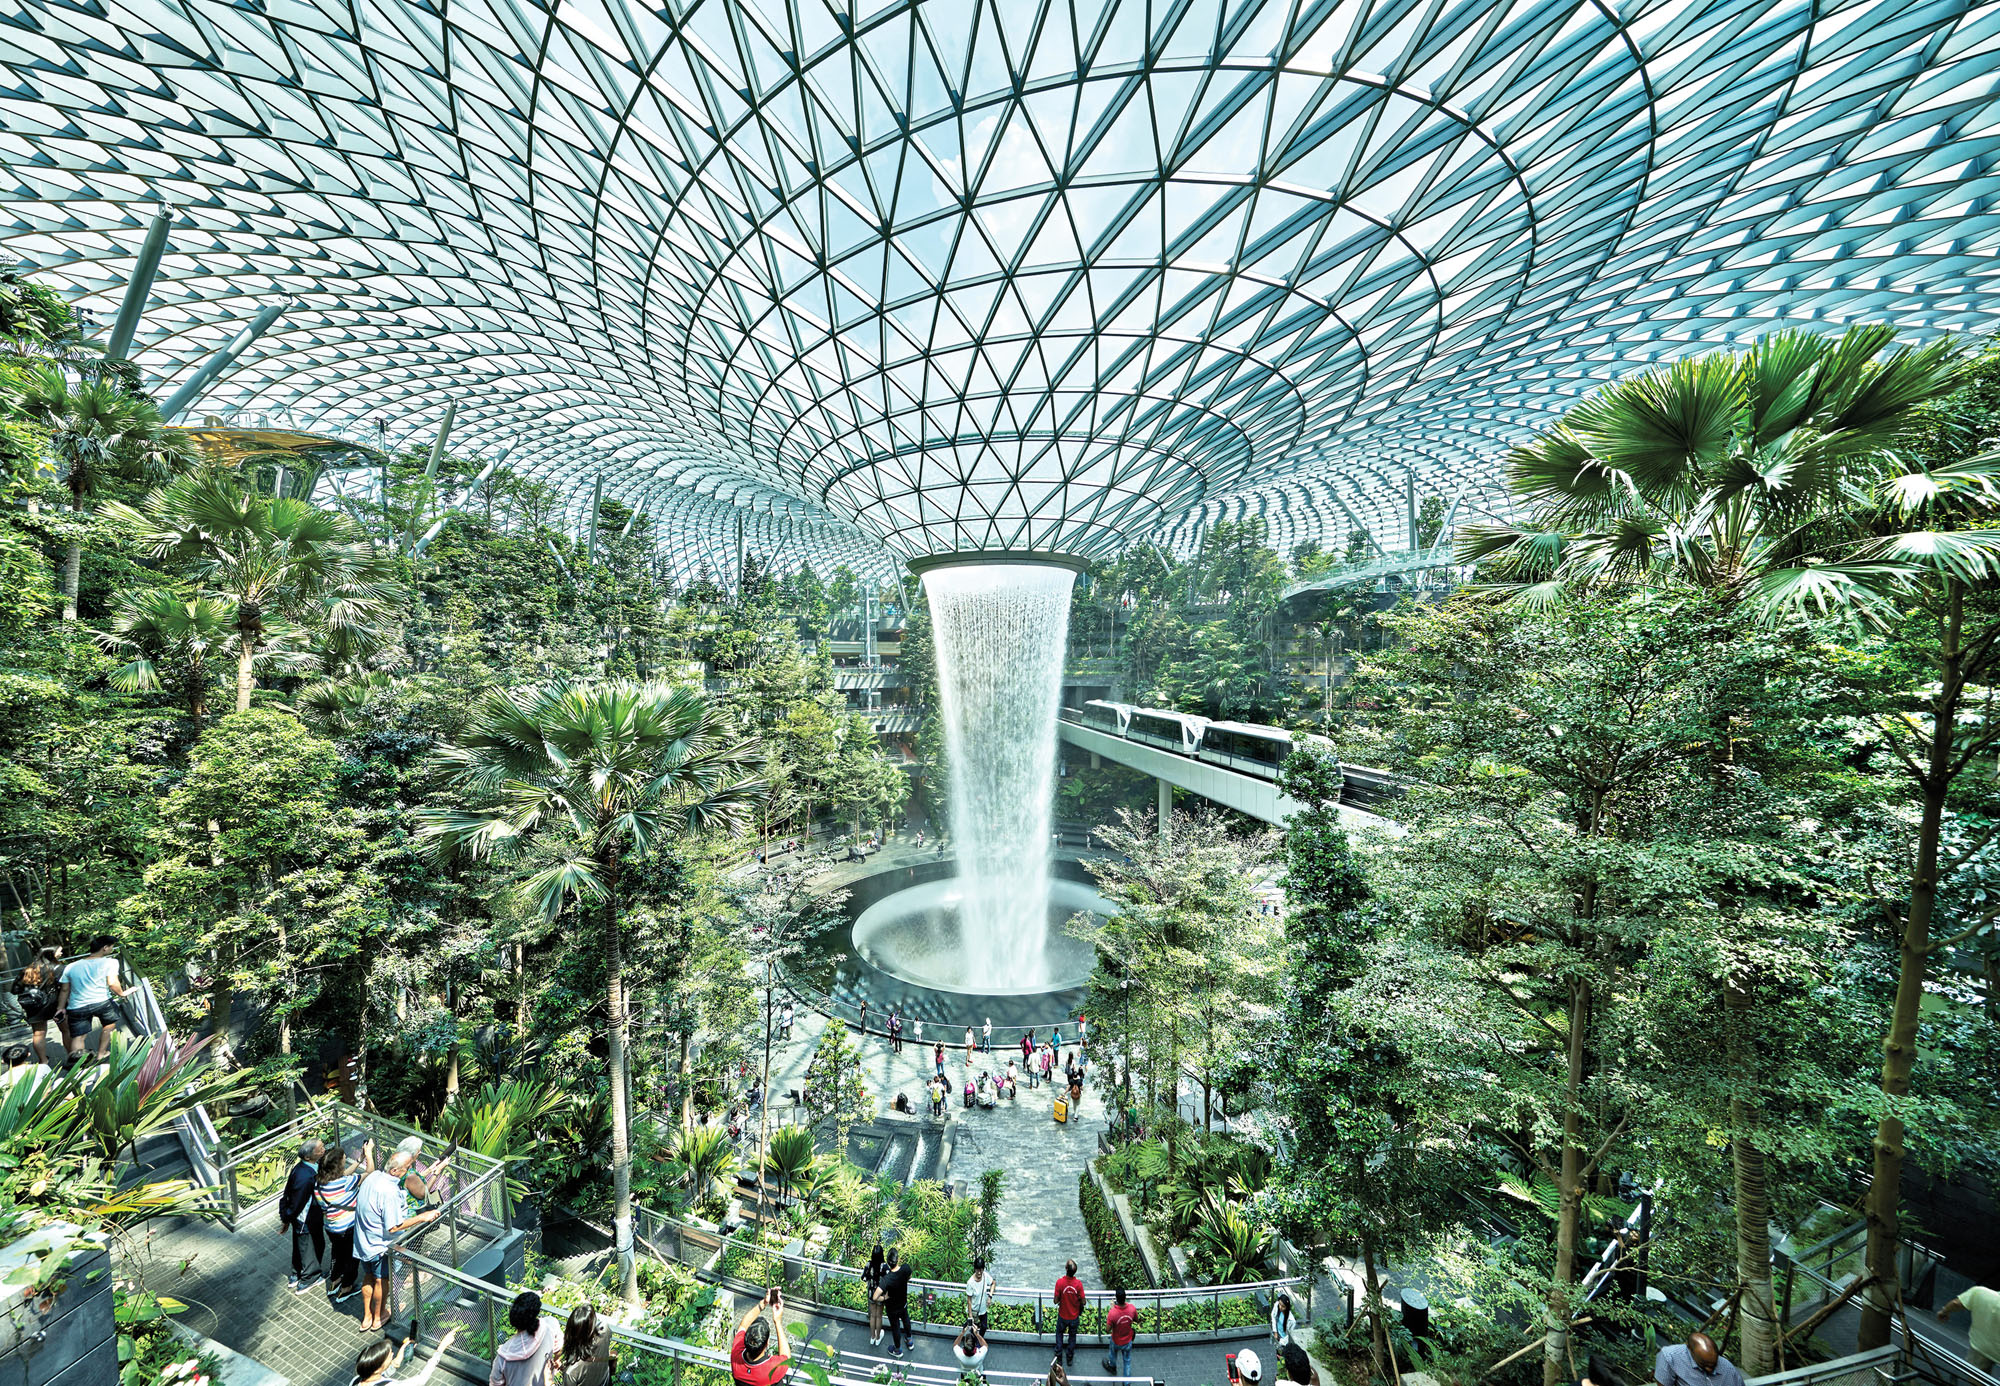 A photograph of the Jewel Changi Airport in singapore with a central waterfall and lush plantings all around